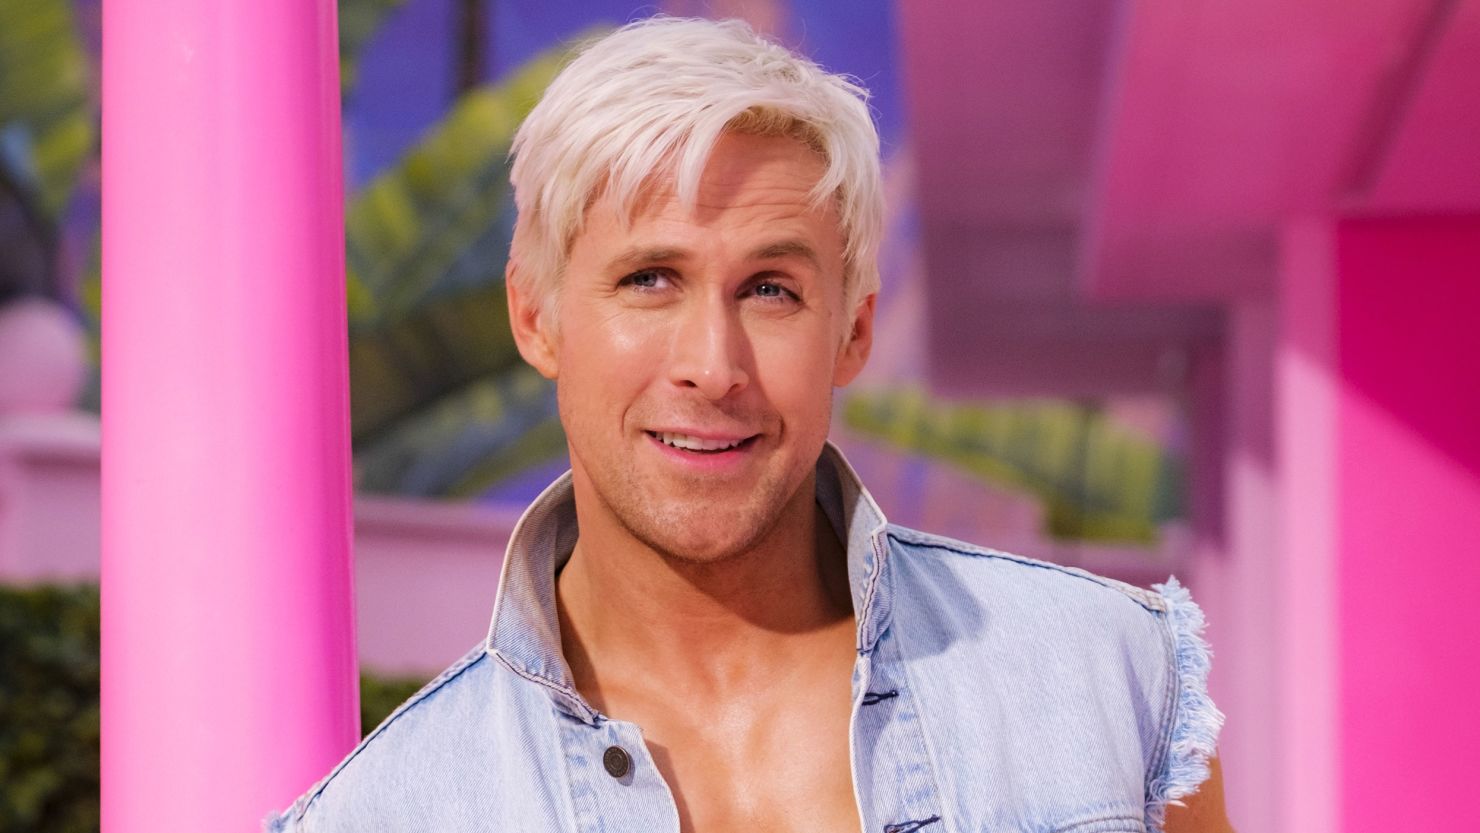 A New Ken Doll Made After Ryan Gosling Has Won Everyone's Hearts / Bright  Side